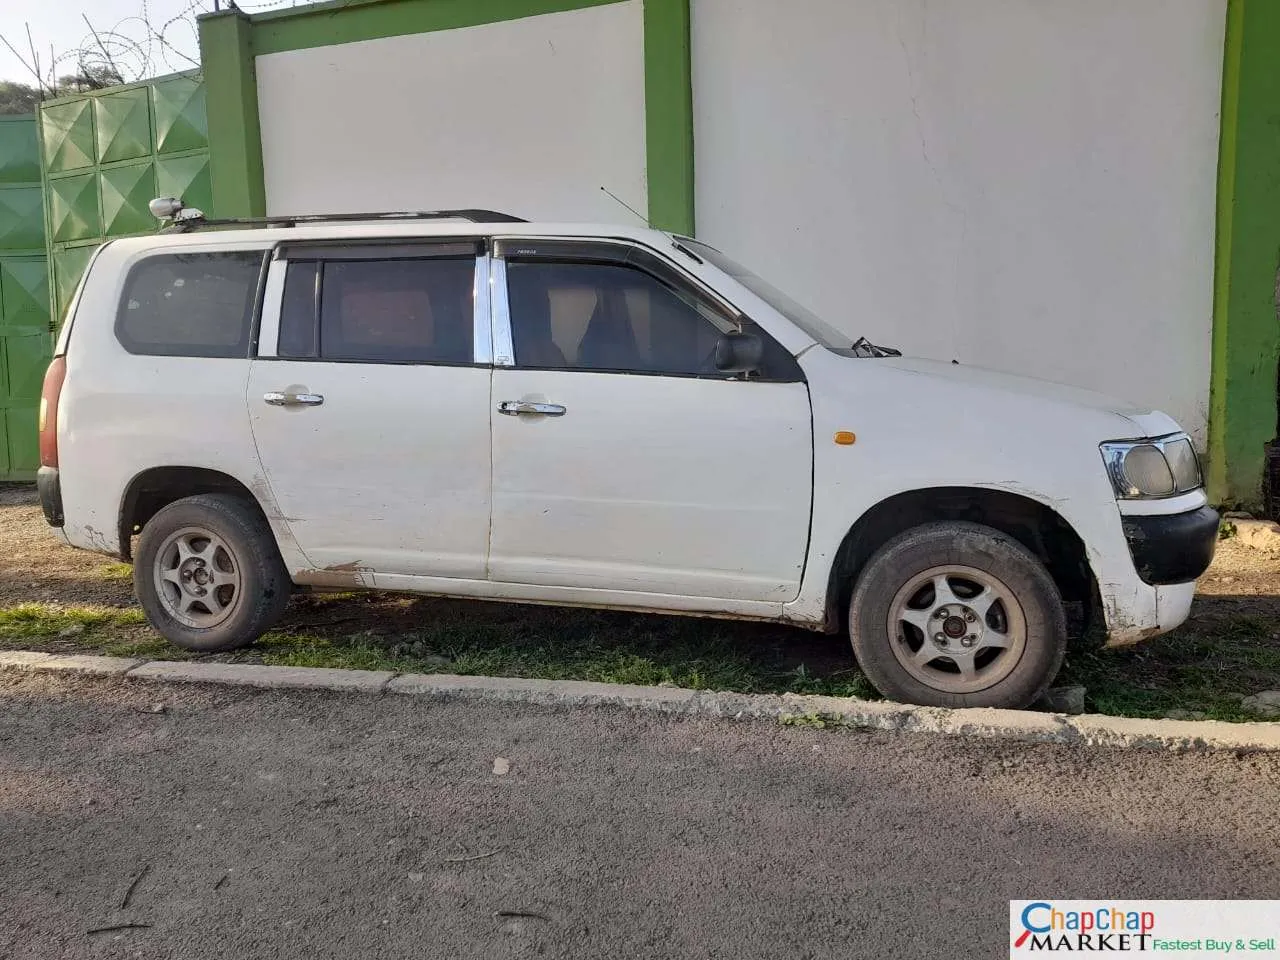 Toyota PROBOX for sale in Kenya 🔥 🔥 QUICK SALE You Pay 30% Deposit Trade in OK EXCLUSIVE